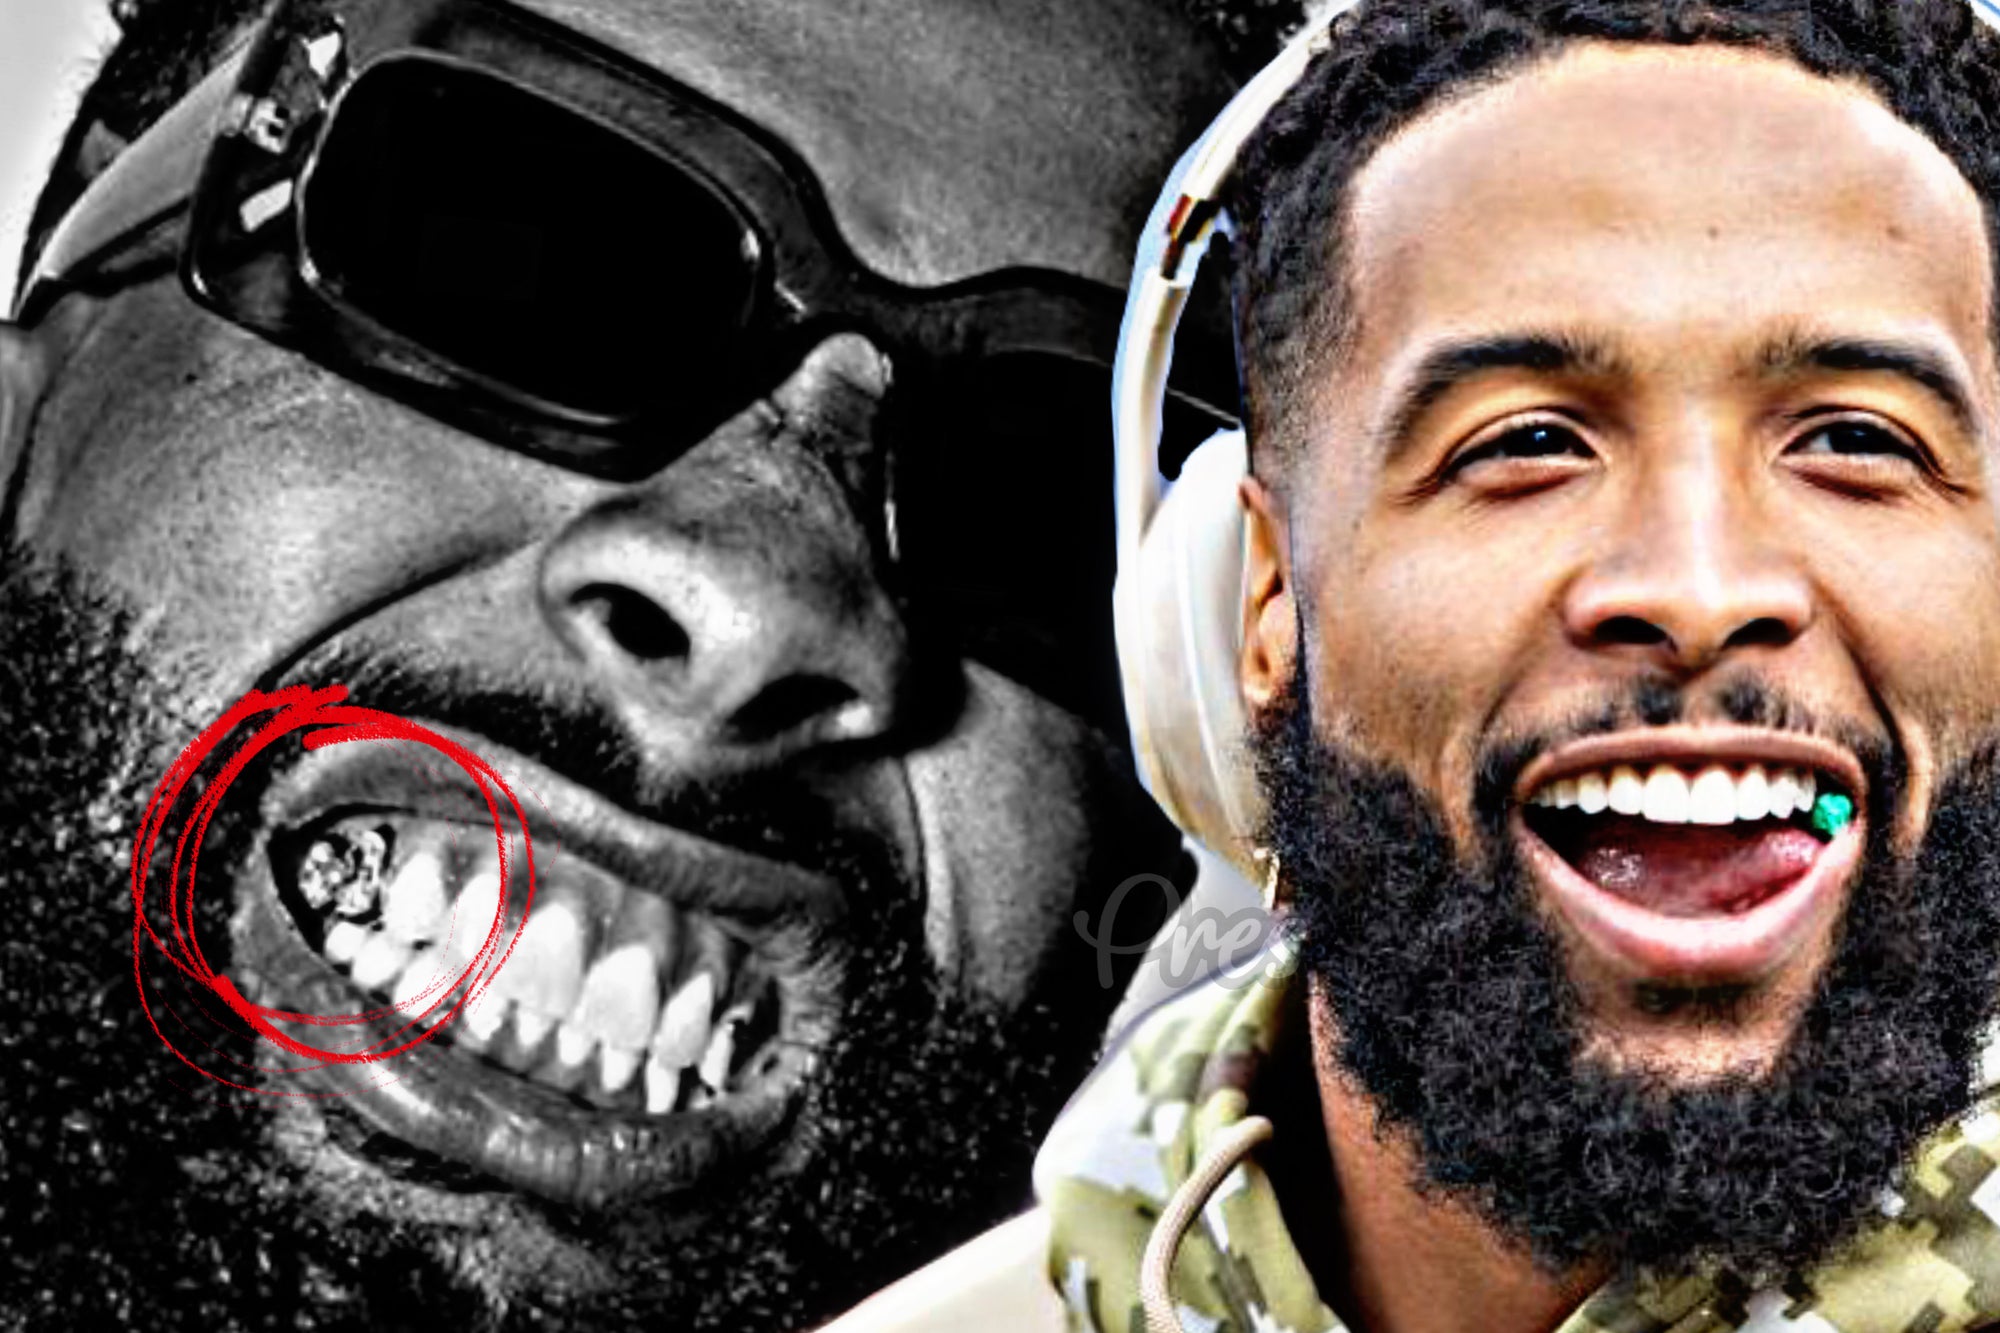 Odell Beckham Jr. Spends $1.8 Million on Diamond Grills, Displays Iced-Out Teeth in Lavish Purchase